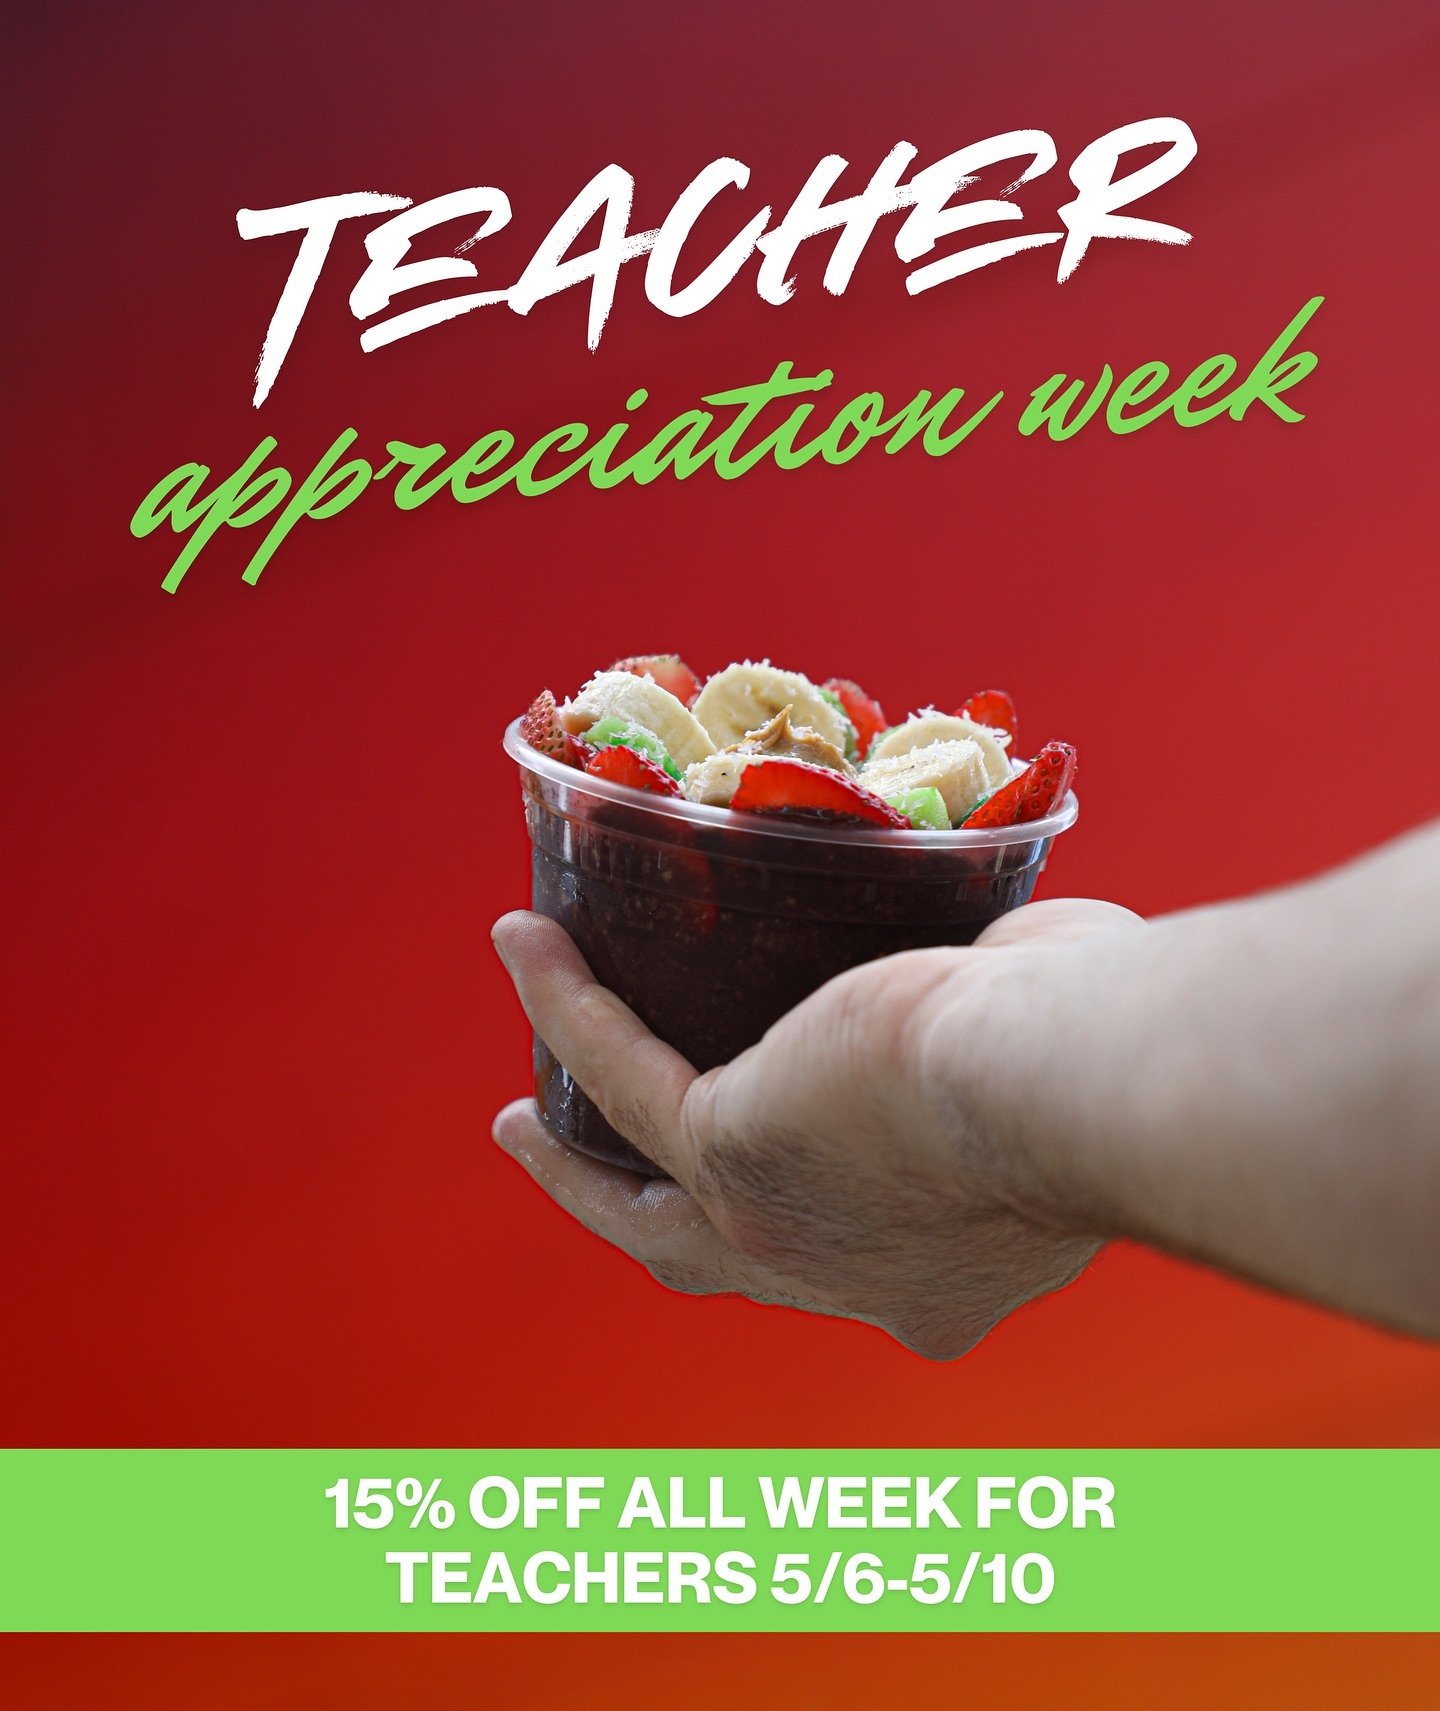 TEACHER APPRECIATION WEEK 📚 15% off all week for all of our teachers! We appreciate ALL that you do! ❤️🙌🏻 Tag your favorite teacher in the comments! We will be picking a teacher to win free smoothies or bowls for a month! 🤩🔥 #Juicedup #teacherap